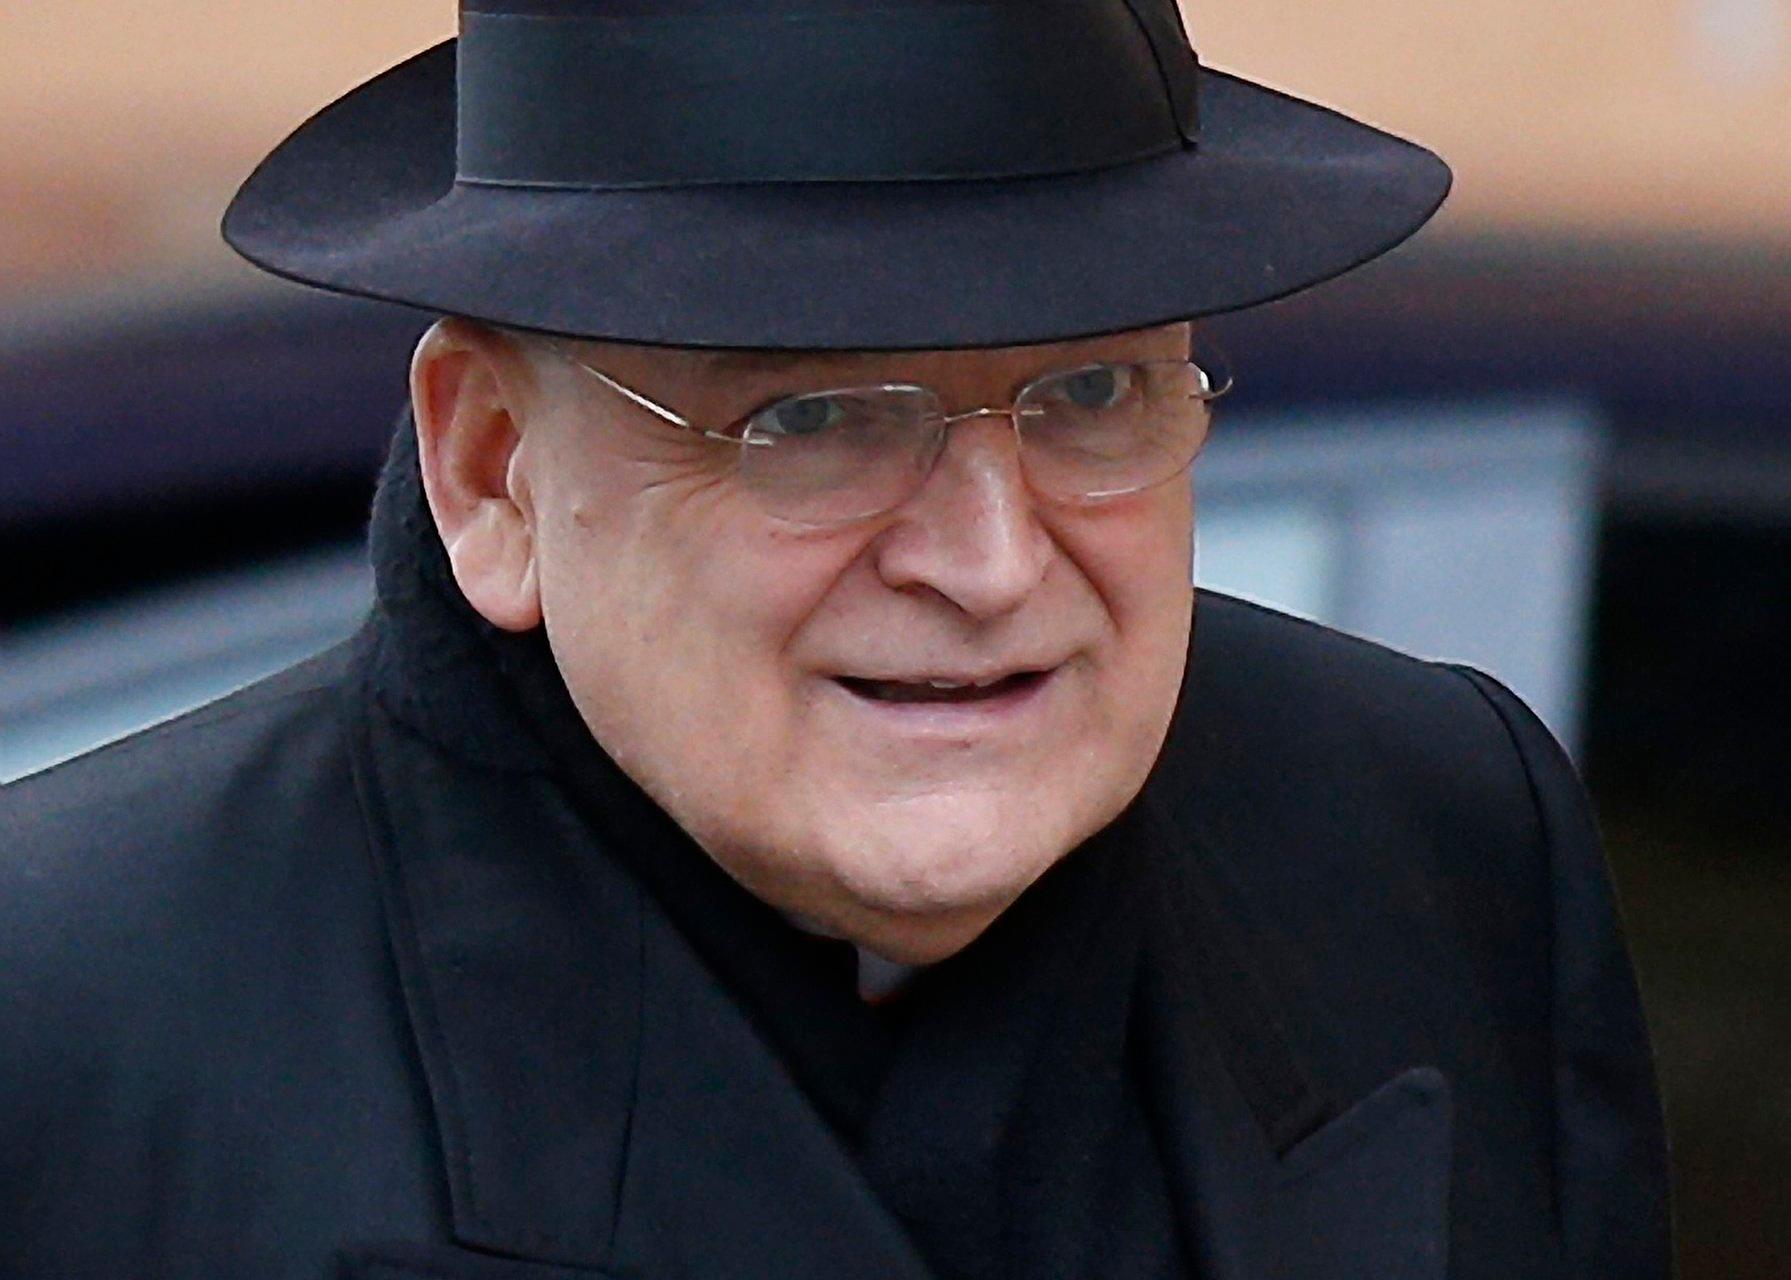 Cardinal Burke continues to recover, urges Catholics to pray rosary daily